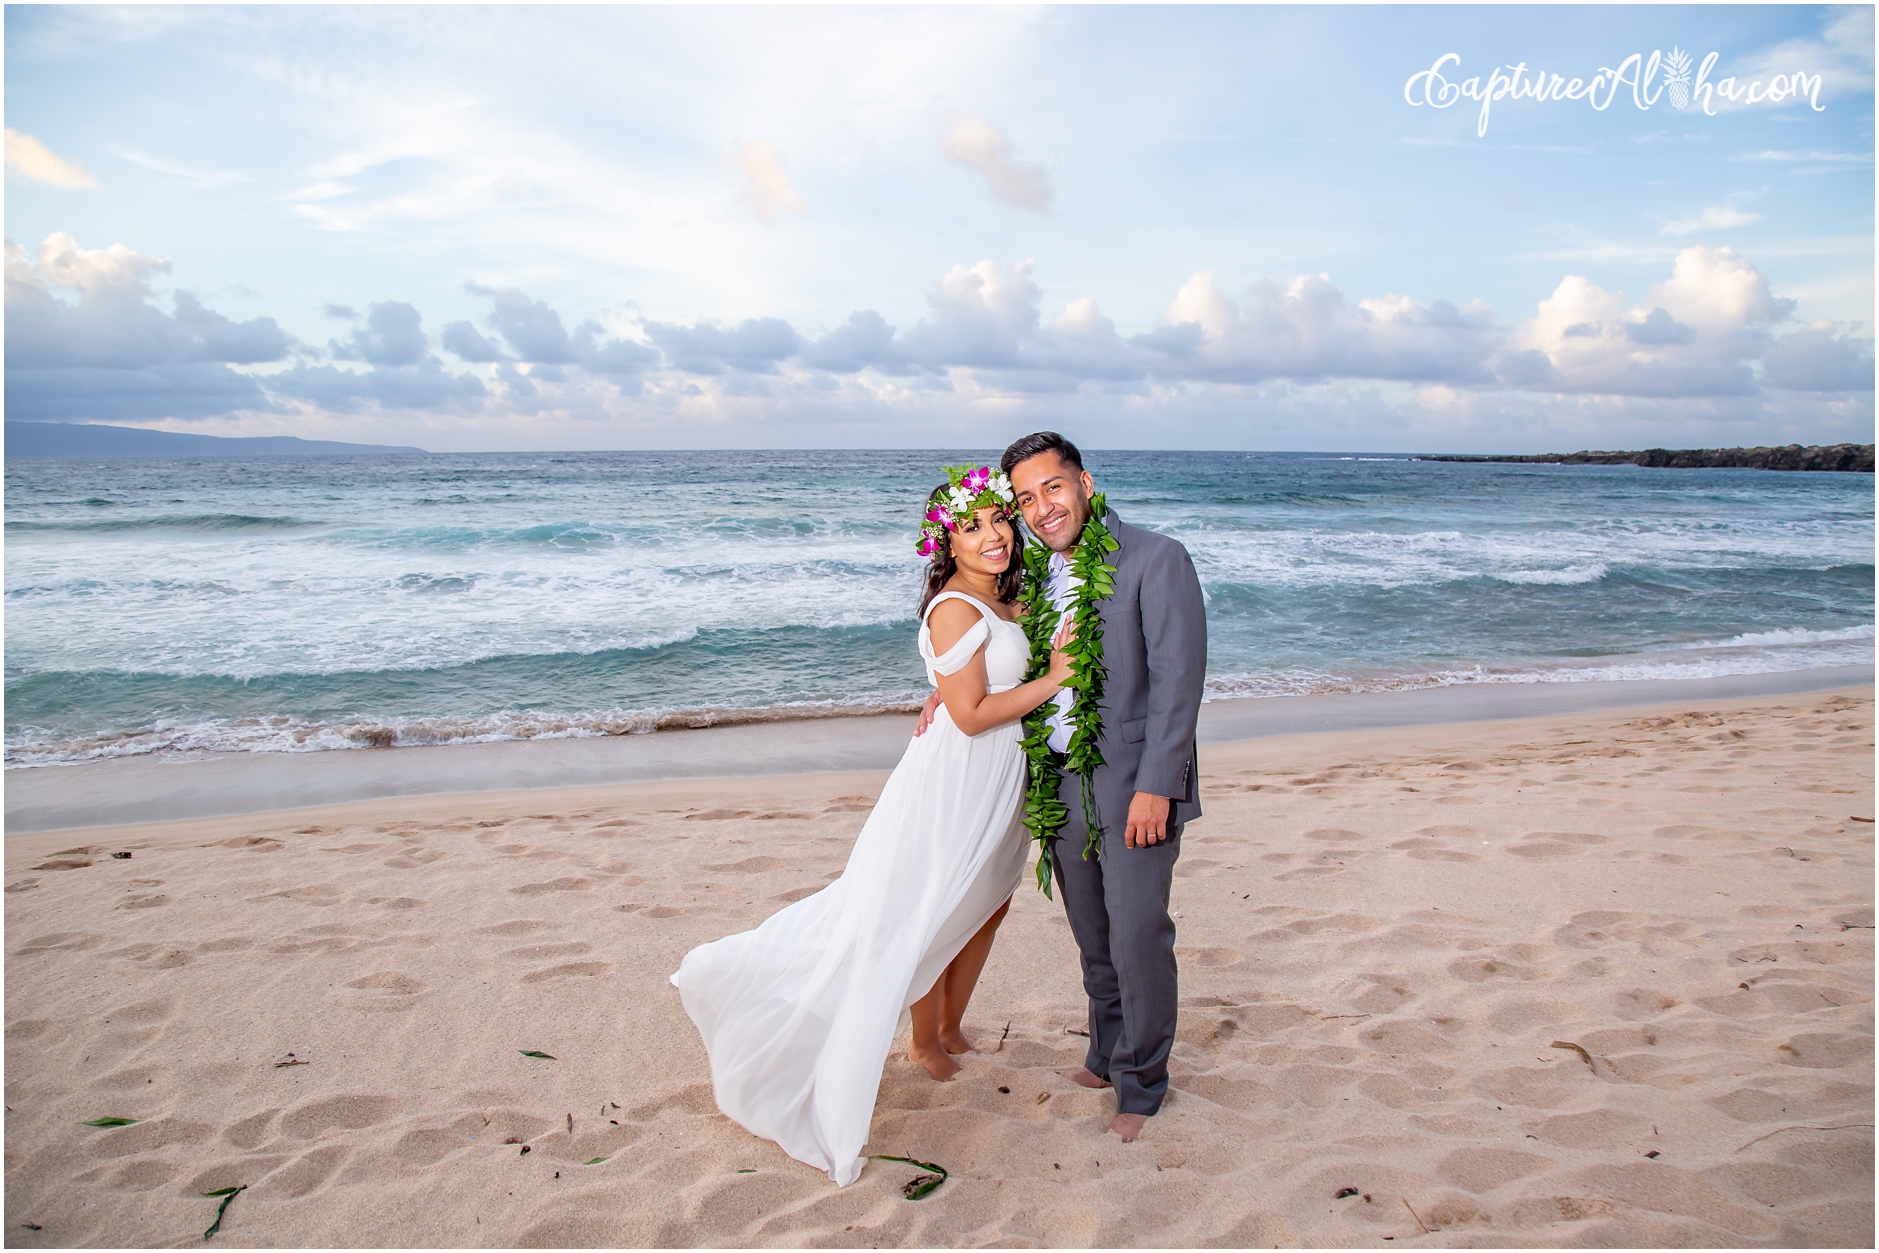 Engagement Photography at Ironwoods Beach in Maui at Sunset